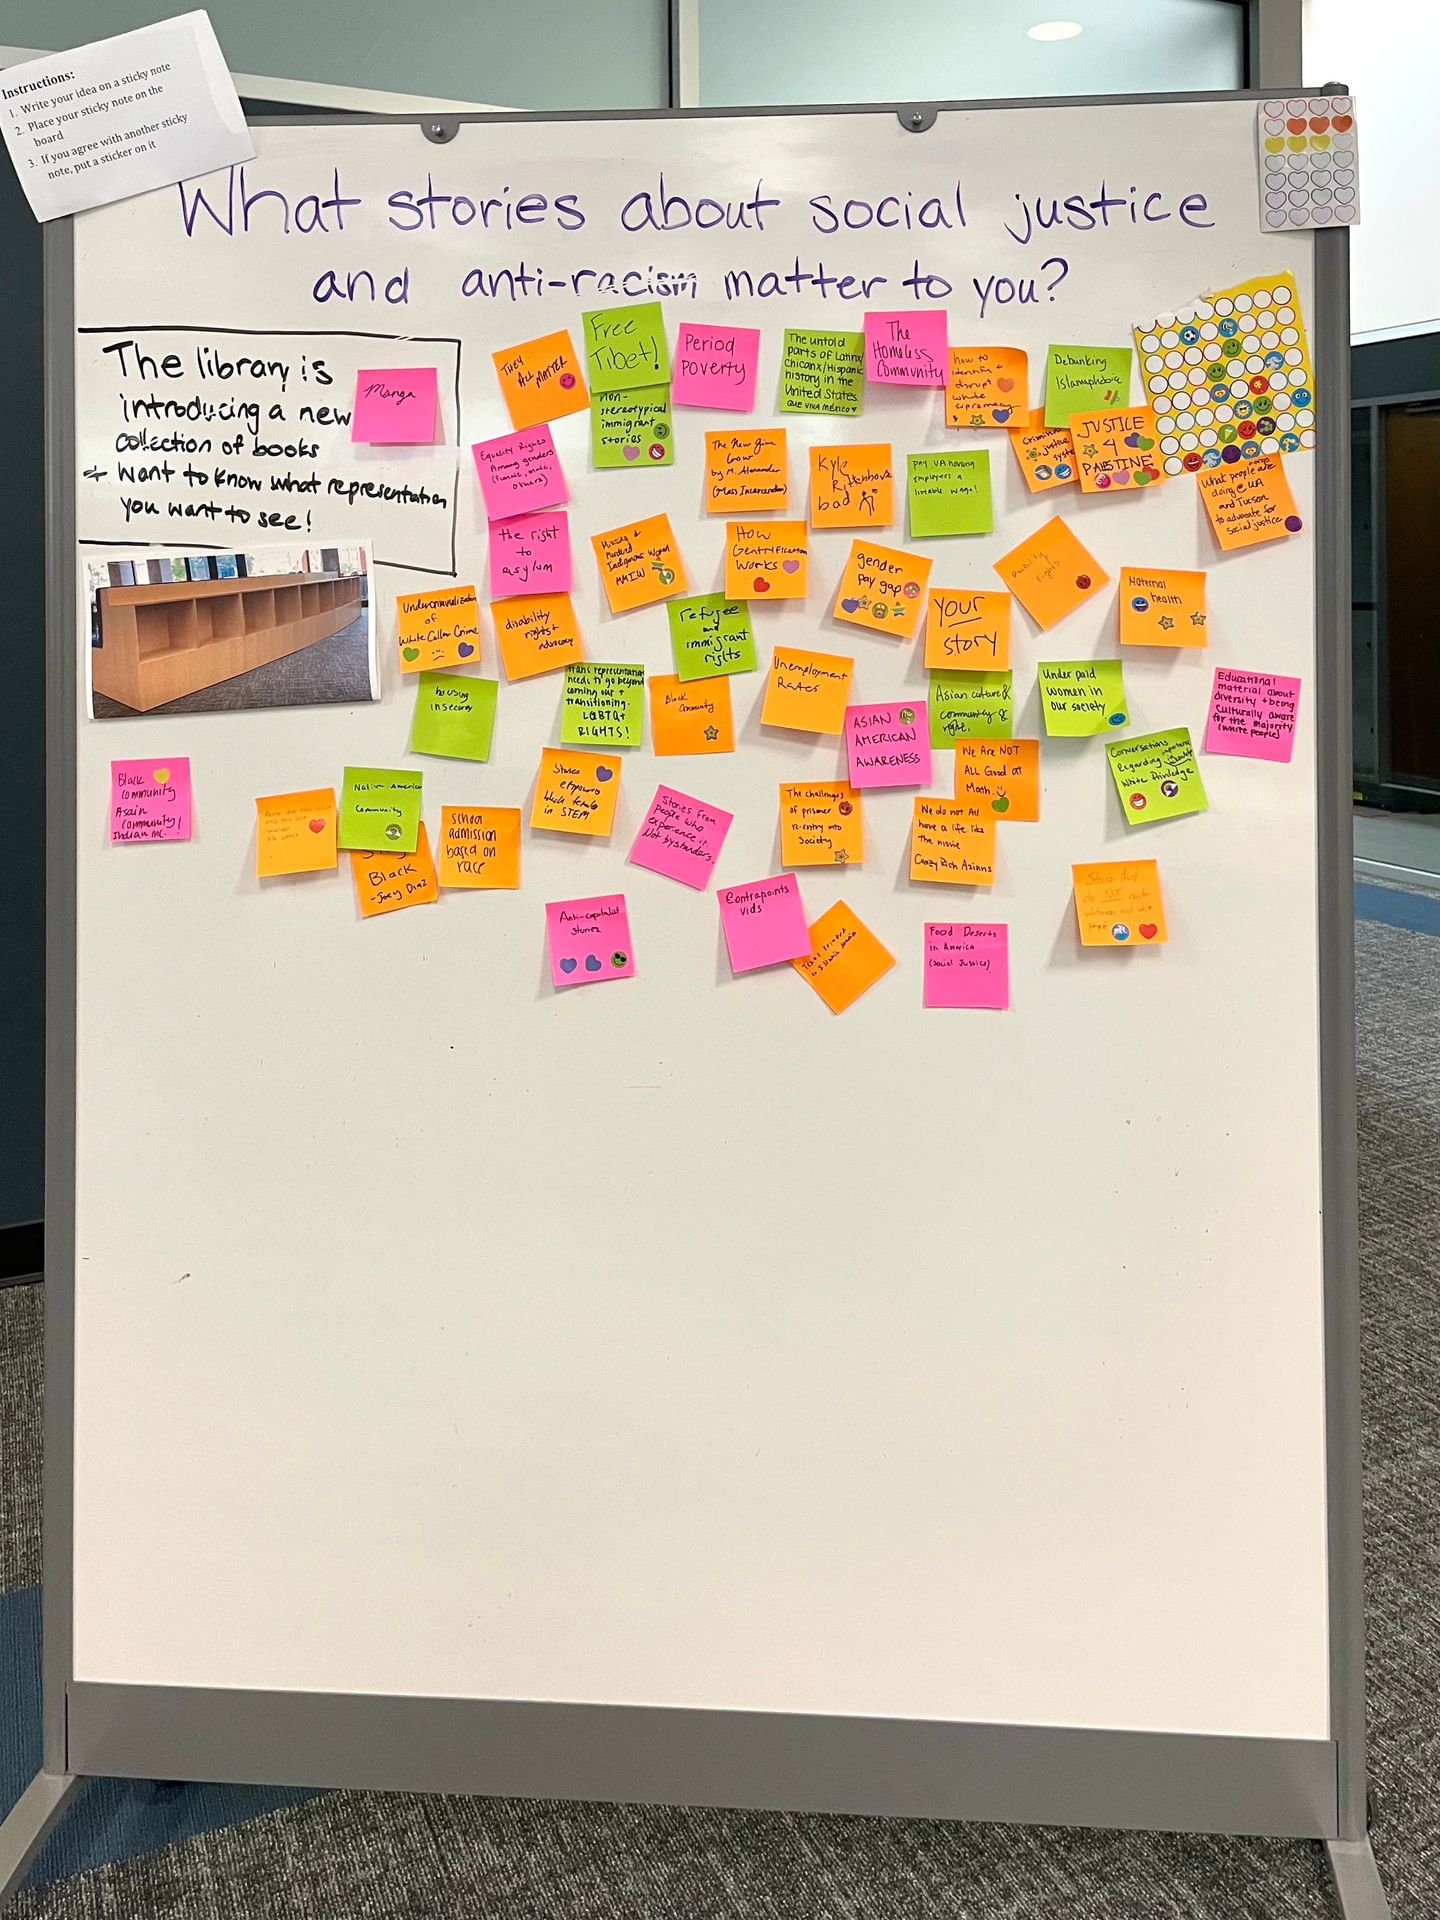 A whiteboard with a question: What stories about social justice and anti-racism matter to you? and answers on sticky notes